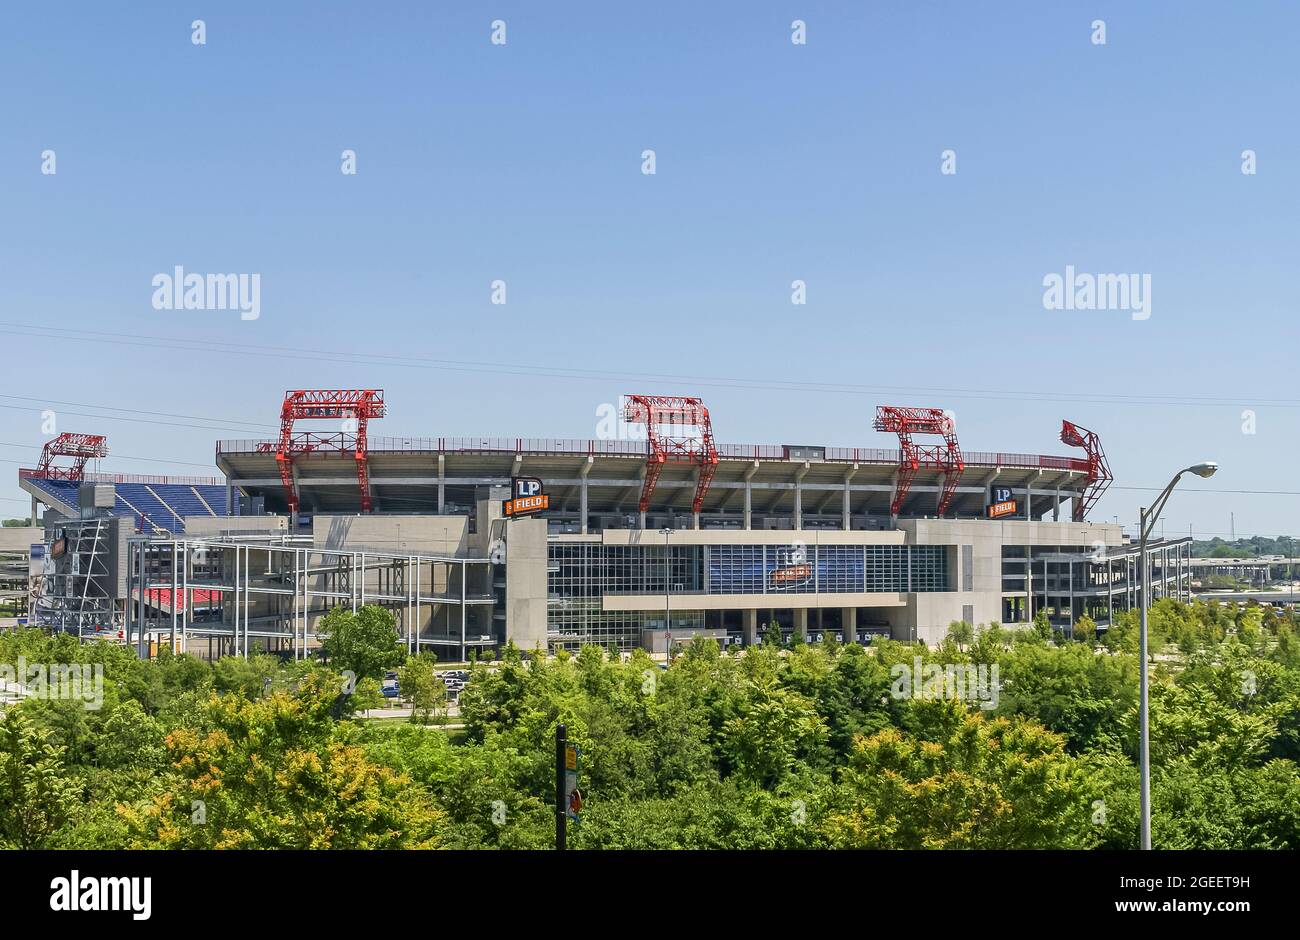 Nashville, TN, USA - May 19, 2007: Downtown. Giant LP Field Stadium, Nissan since 2015, where NFL Titans play under blue sky with green foliage in fro Stock Photo